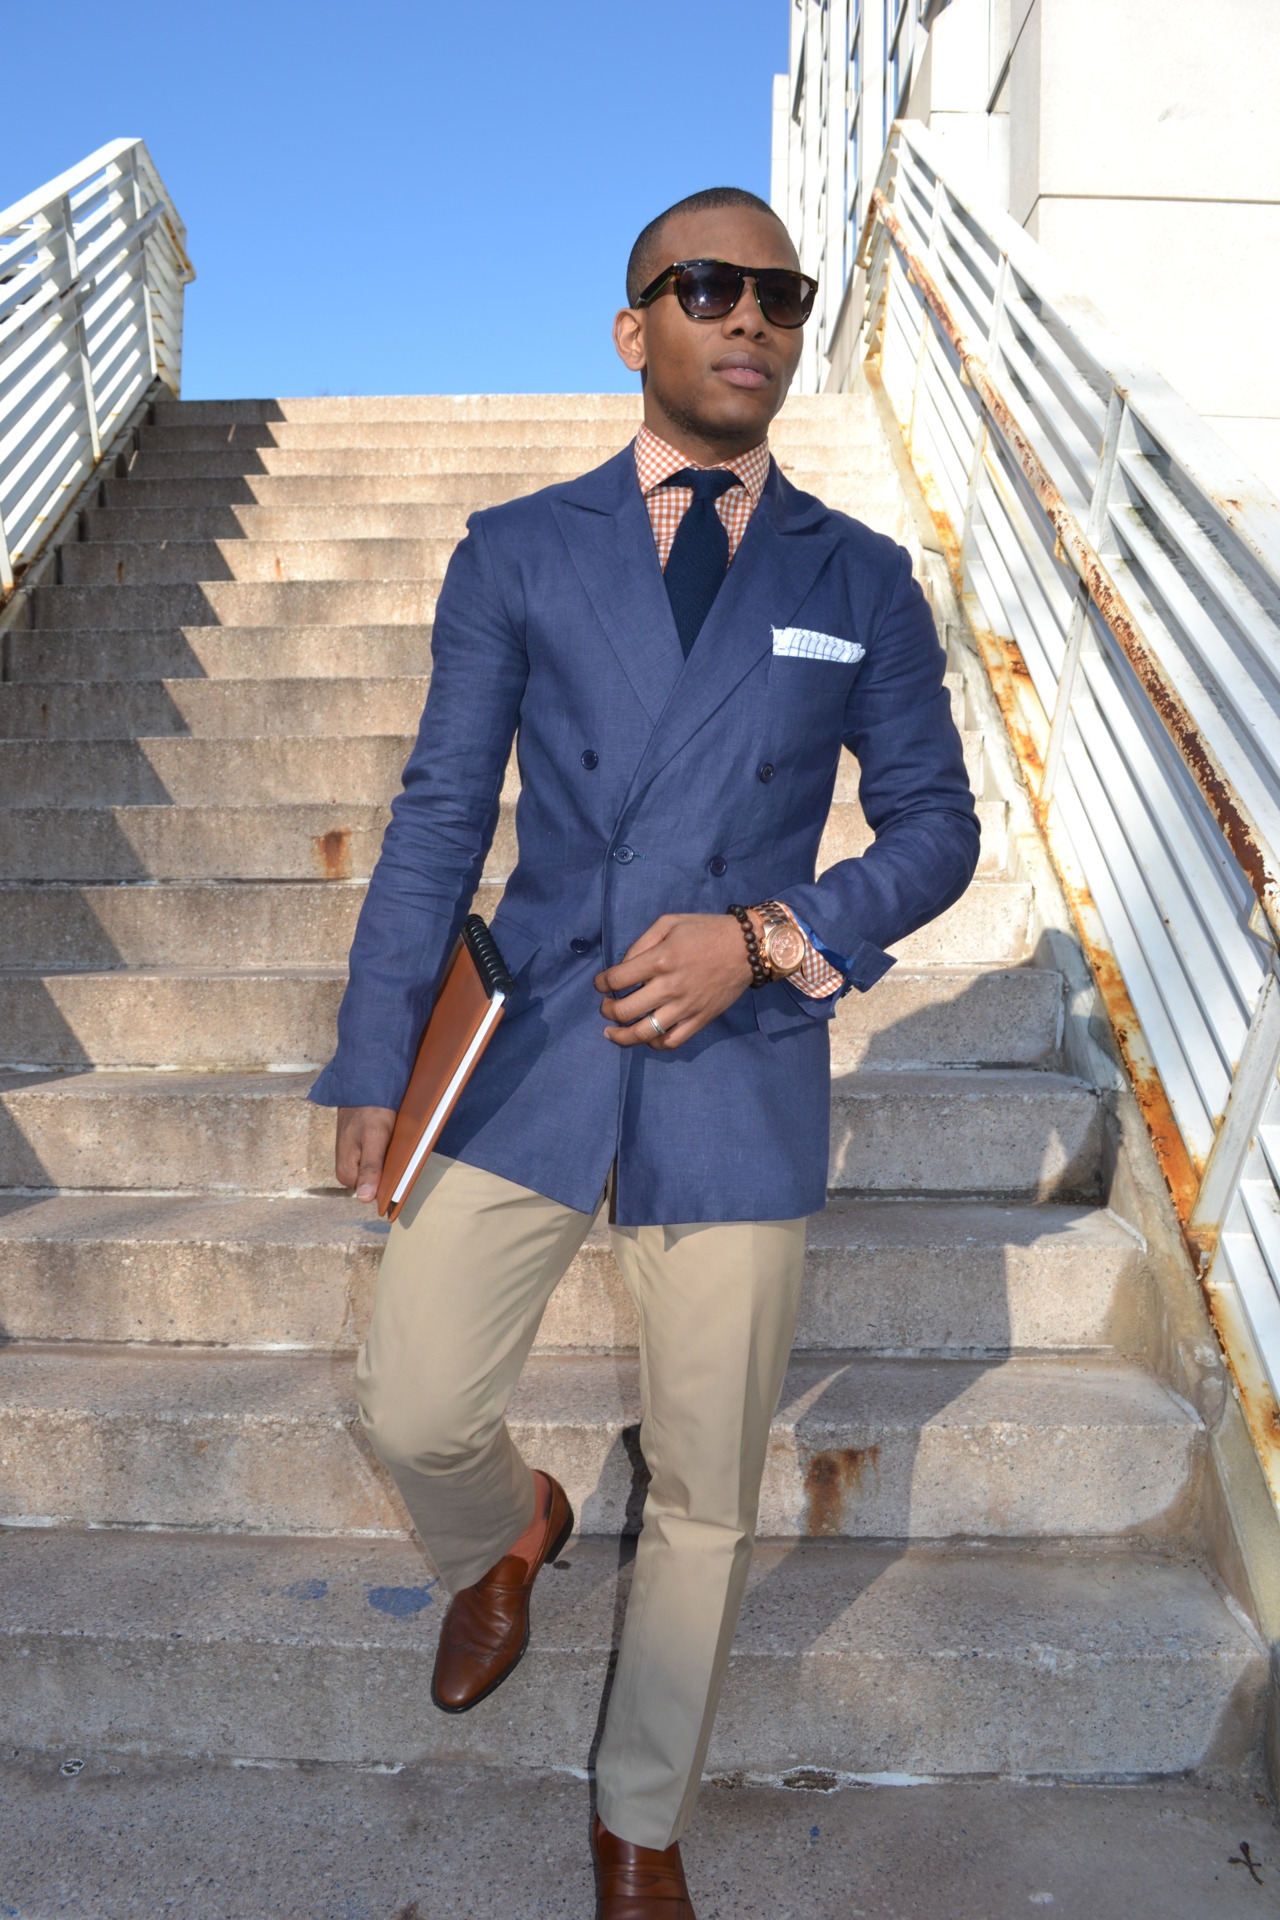 THIS AND THAT STYLE! - welldressedman: via Men’s Style Pro (Sabir M....